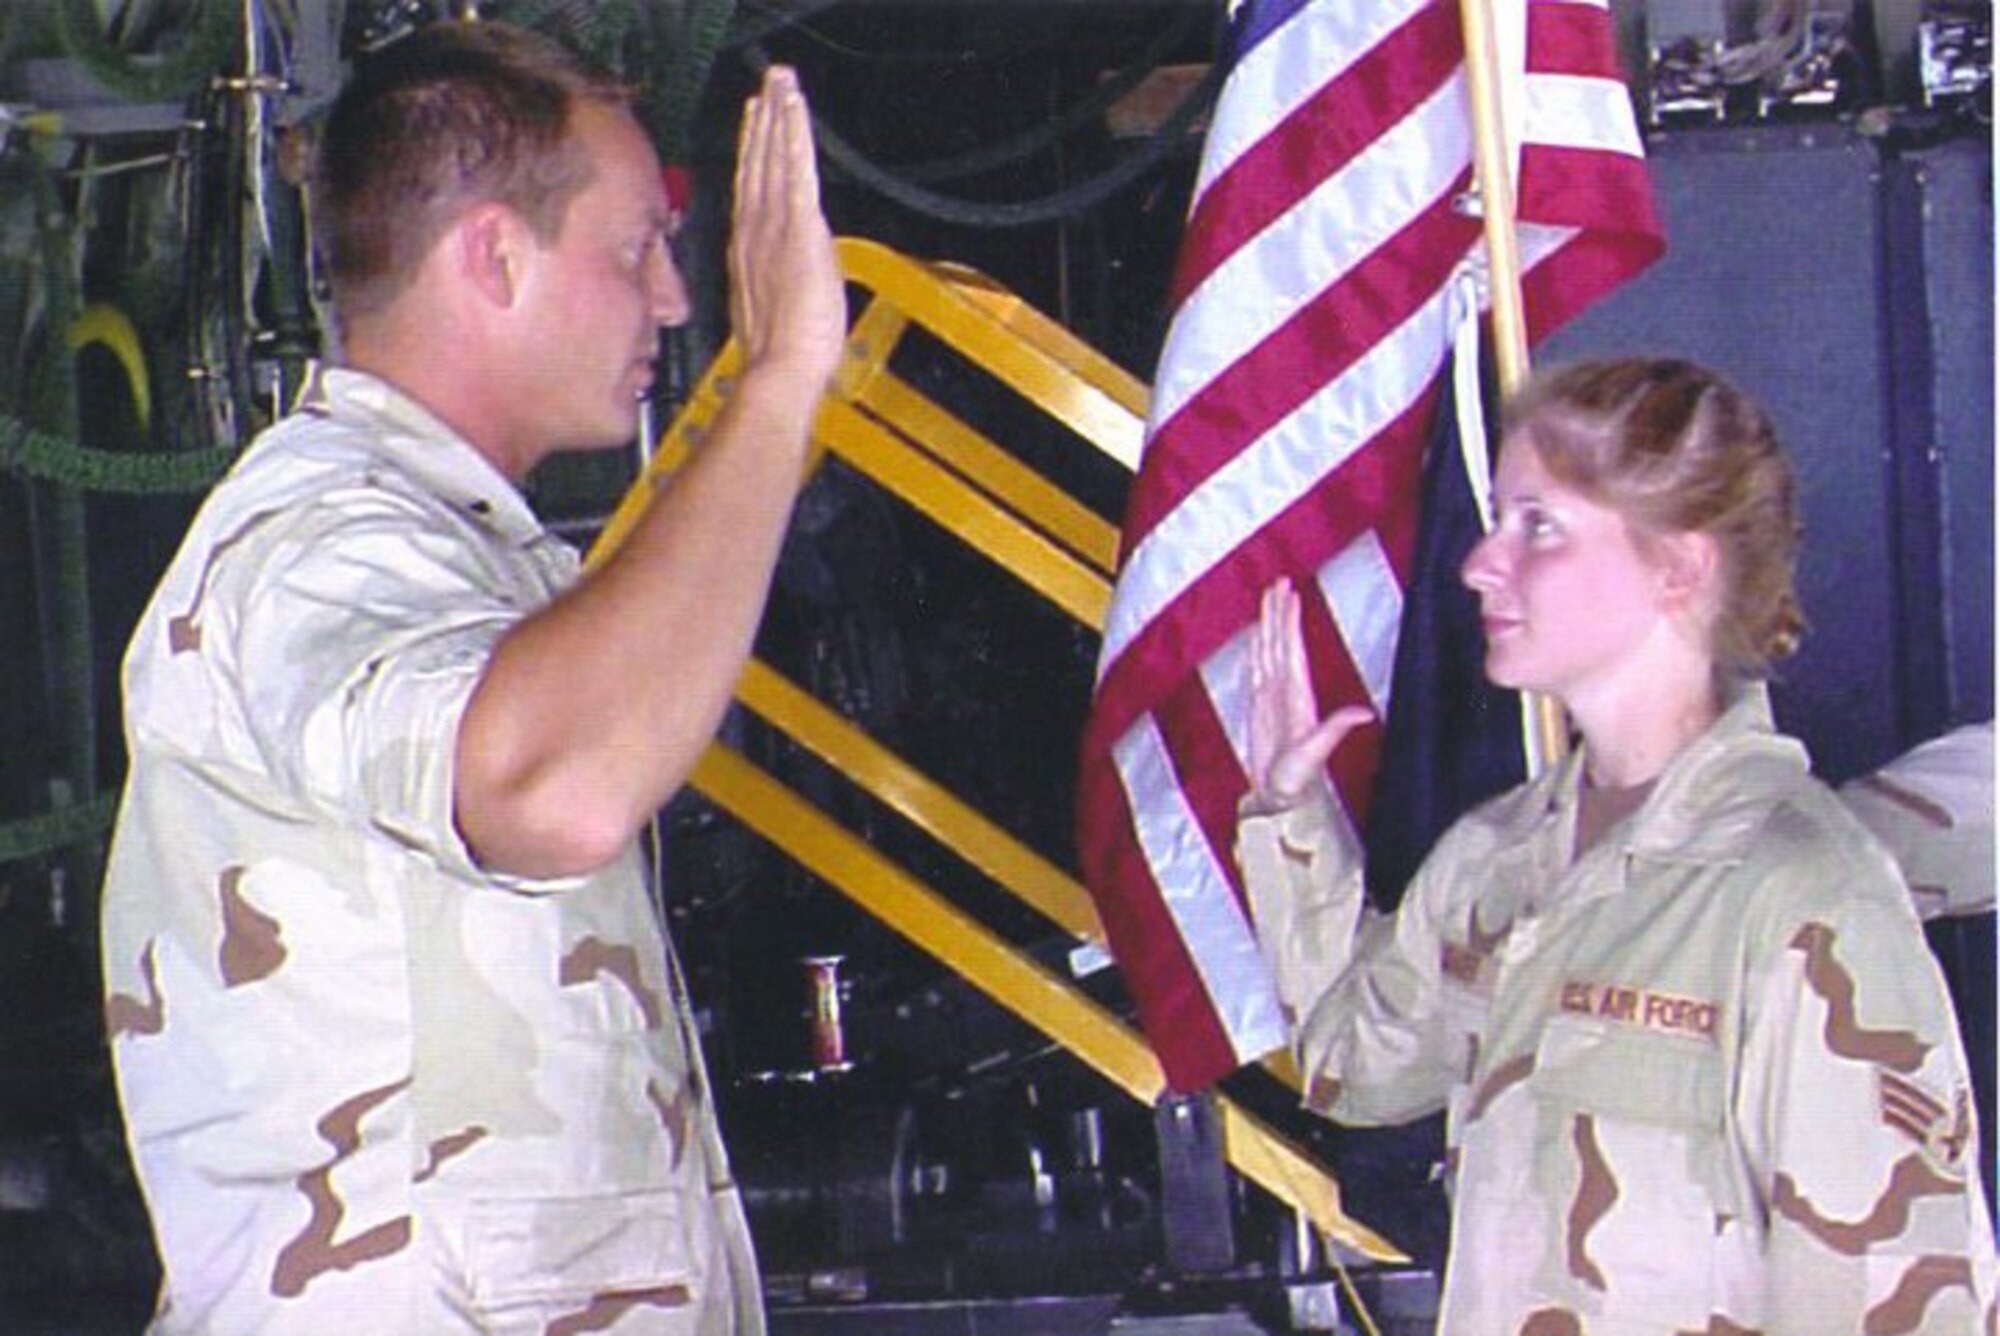 Then Senior Airman Summer Chamberlain is reenlisted by her flight commander, 1st Lt. Luke Barringer, while deployed to Southwest Asia Sept. 27, 2002. It was Chamberlain’s first reenlistment ceremony, and it took place aboard a C-130 gunship. (Courtesy photo)